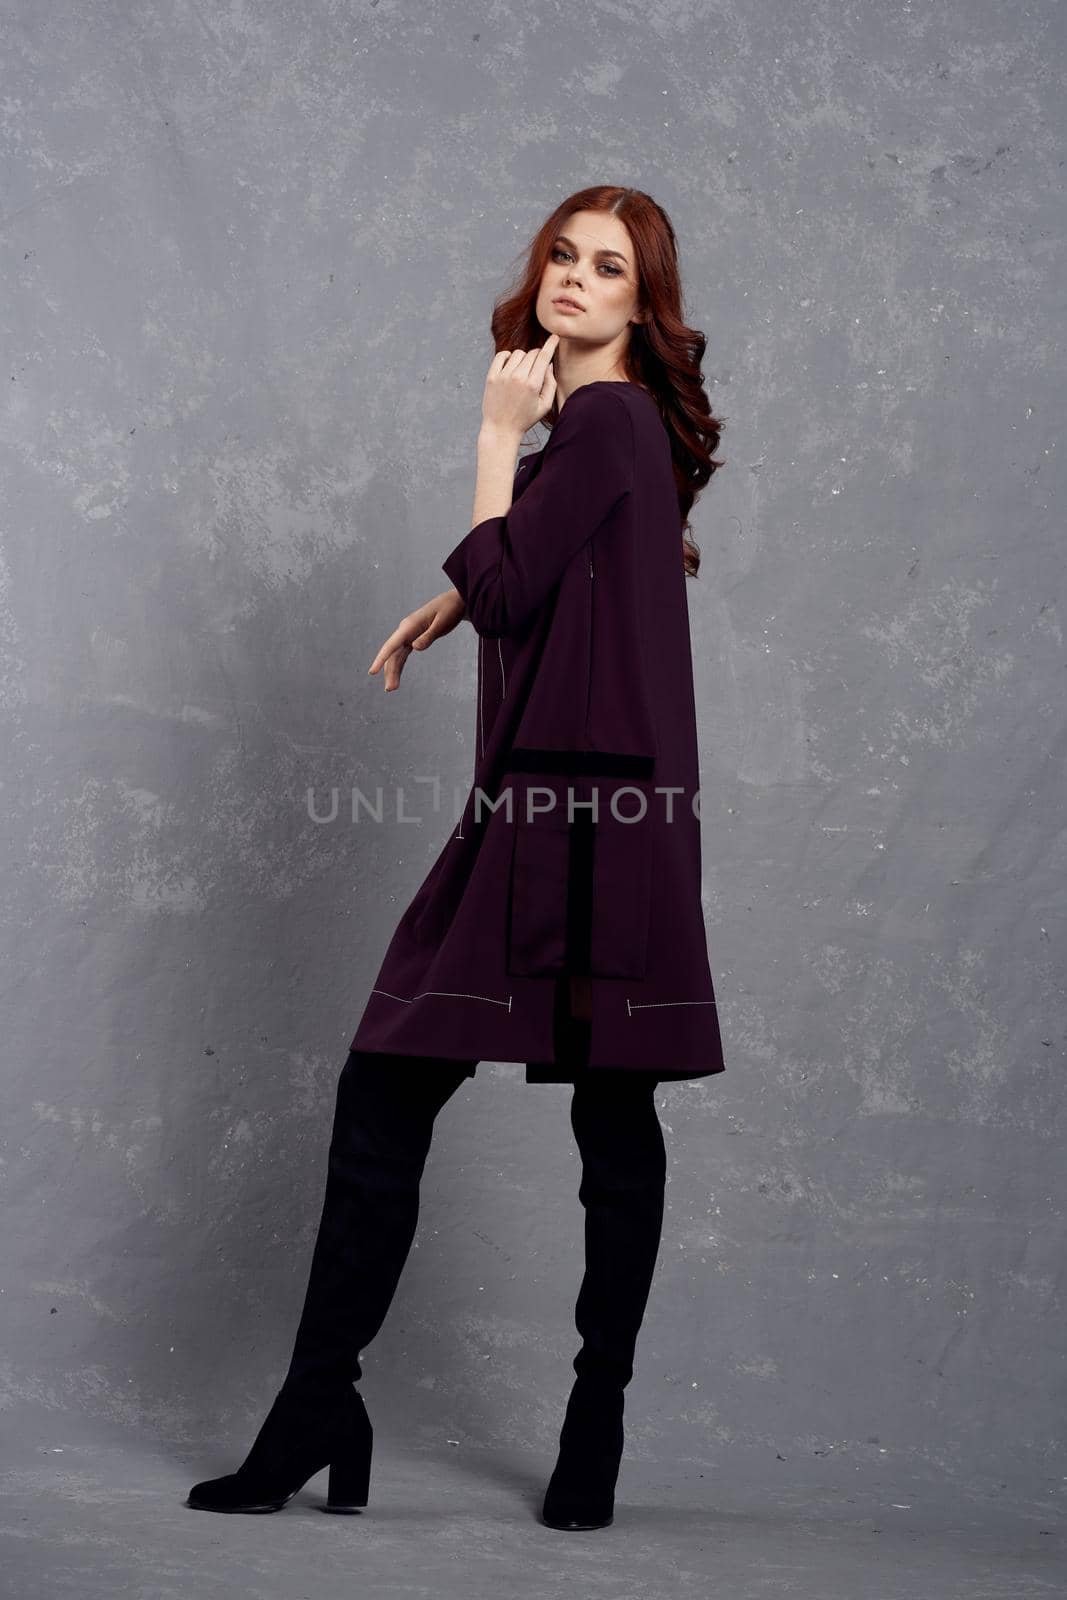 woman with red hair posing fashionable clothing elegant style. High quality photo